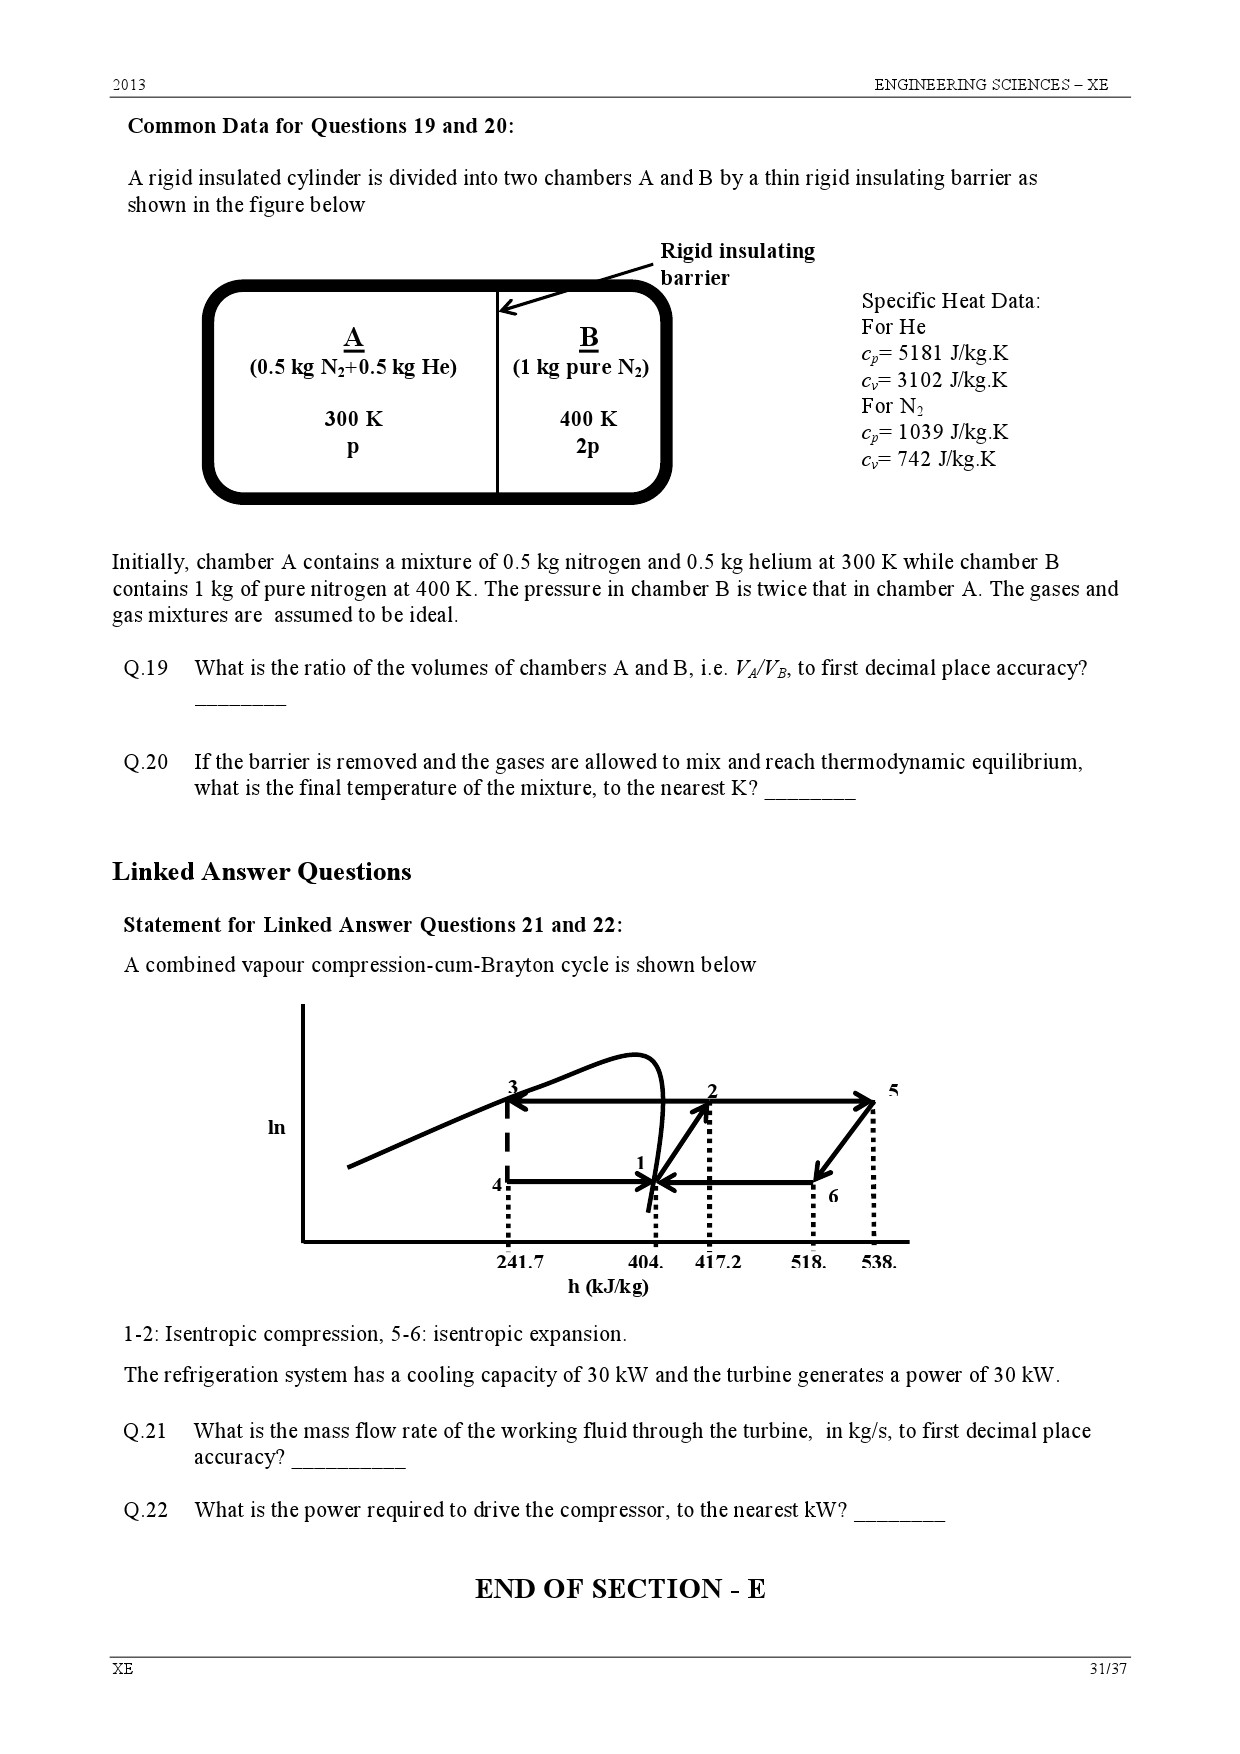 GATE Exam Question Paper 2013 Engineering Sciences 31